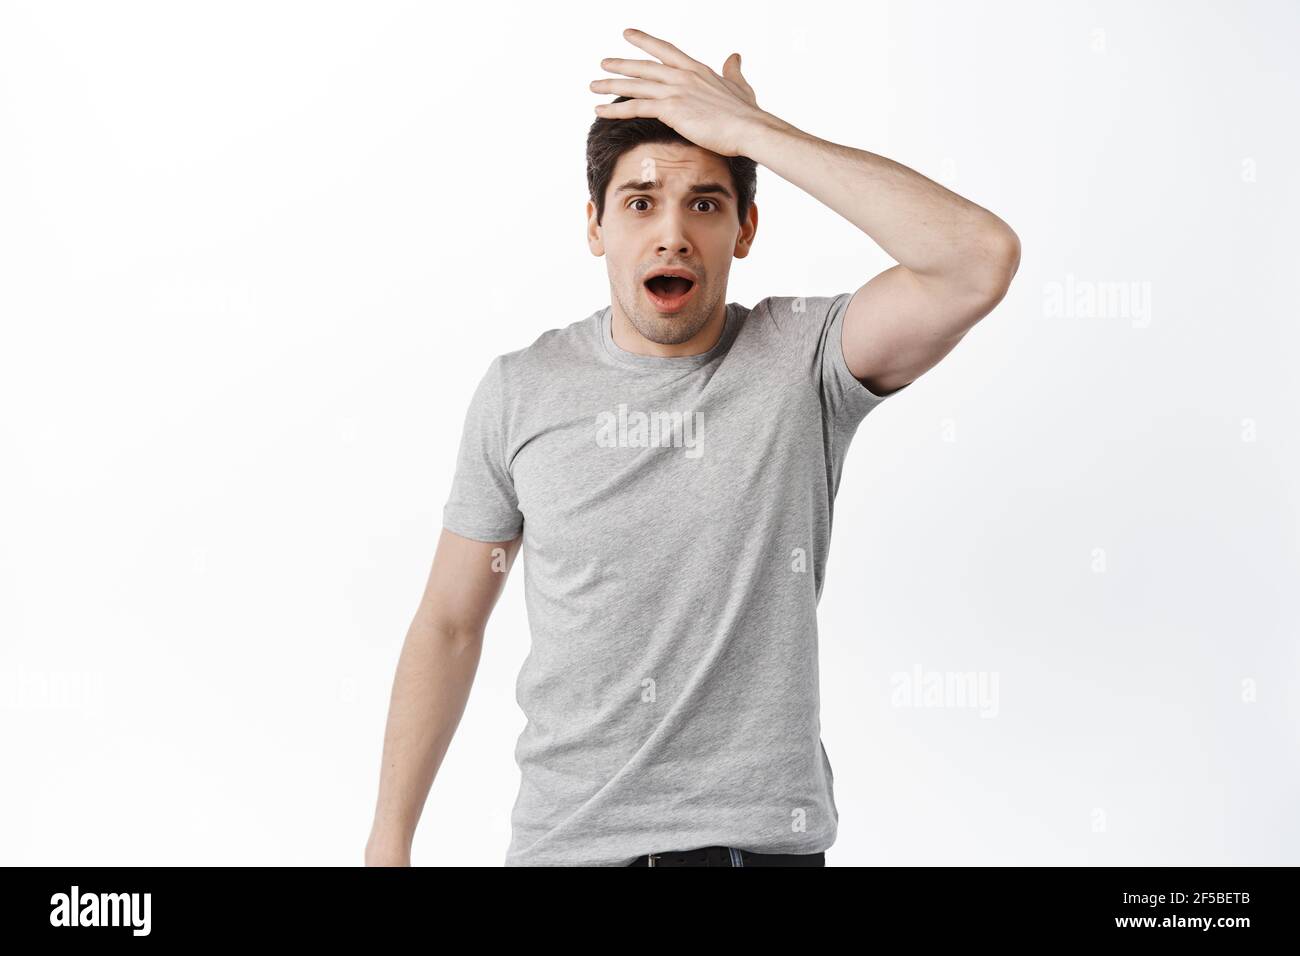 Shocked man forgot remember something, slap forehead and gasp at camera, standing forgetful against white background Stock Photo